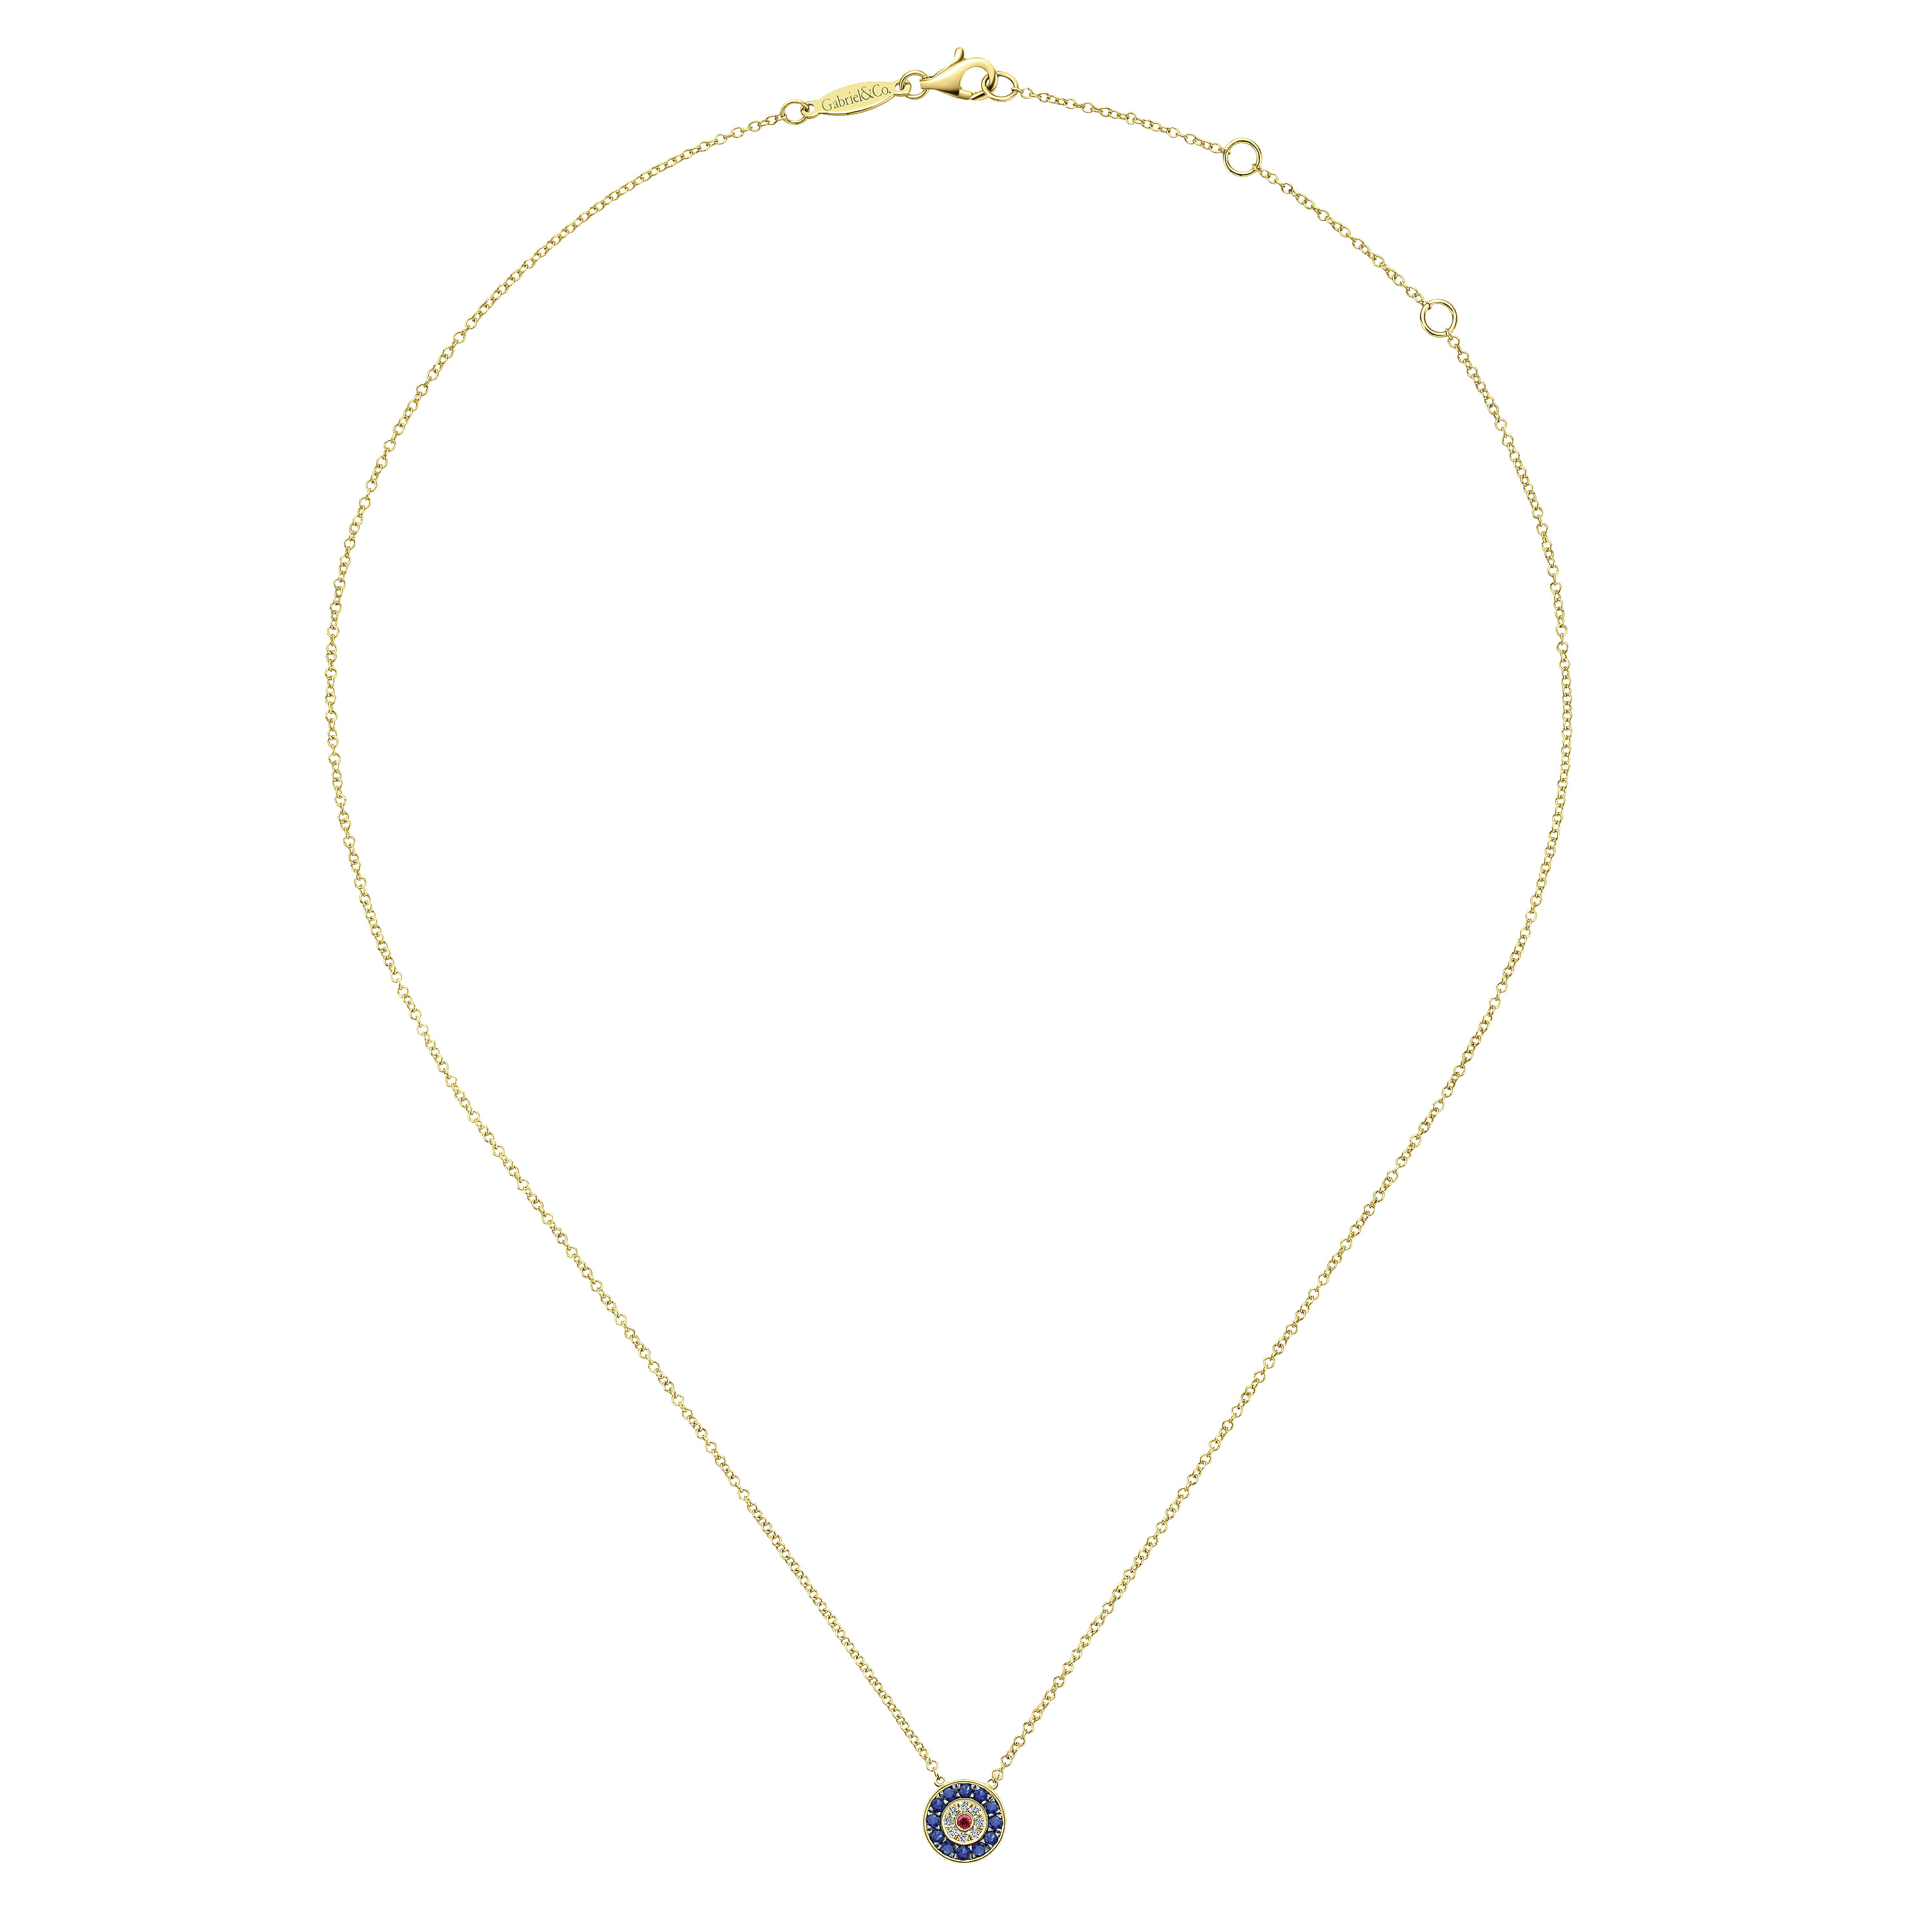 14K Yellow Gold Sapphire, Ruby and Diamond Evil Eye Pendant Necklace